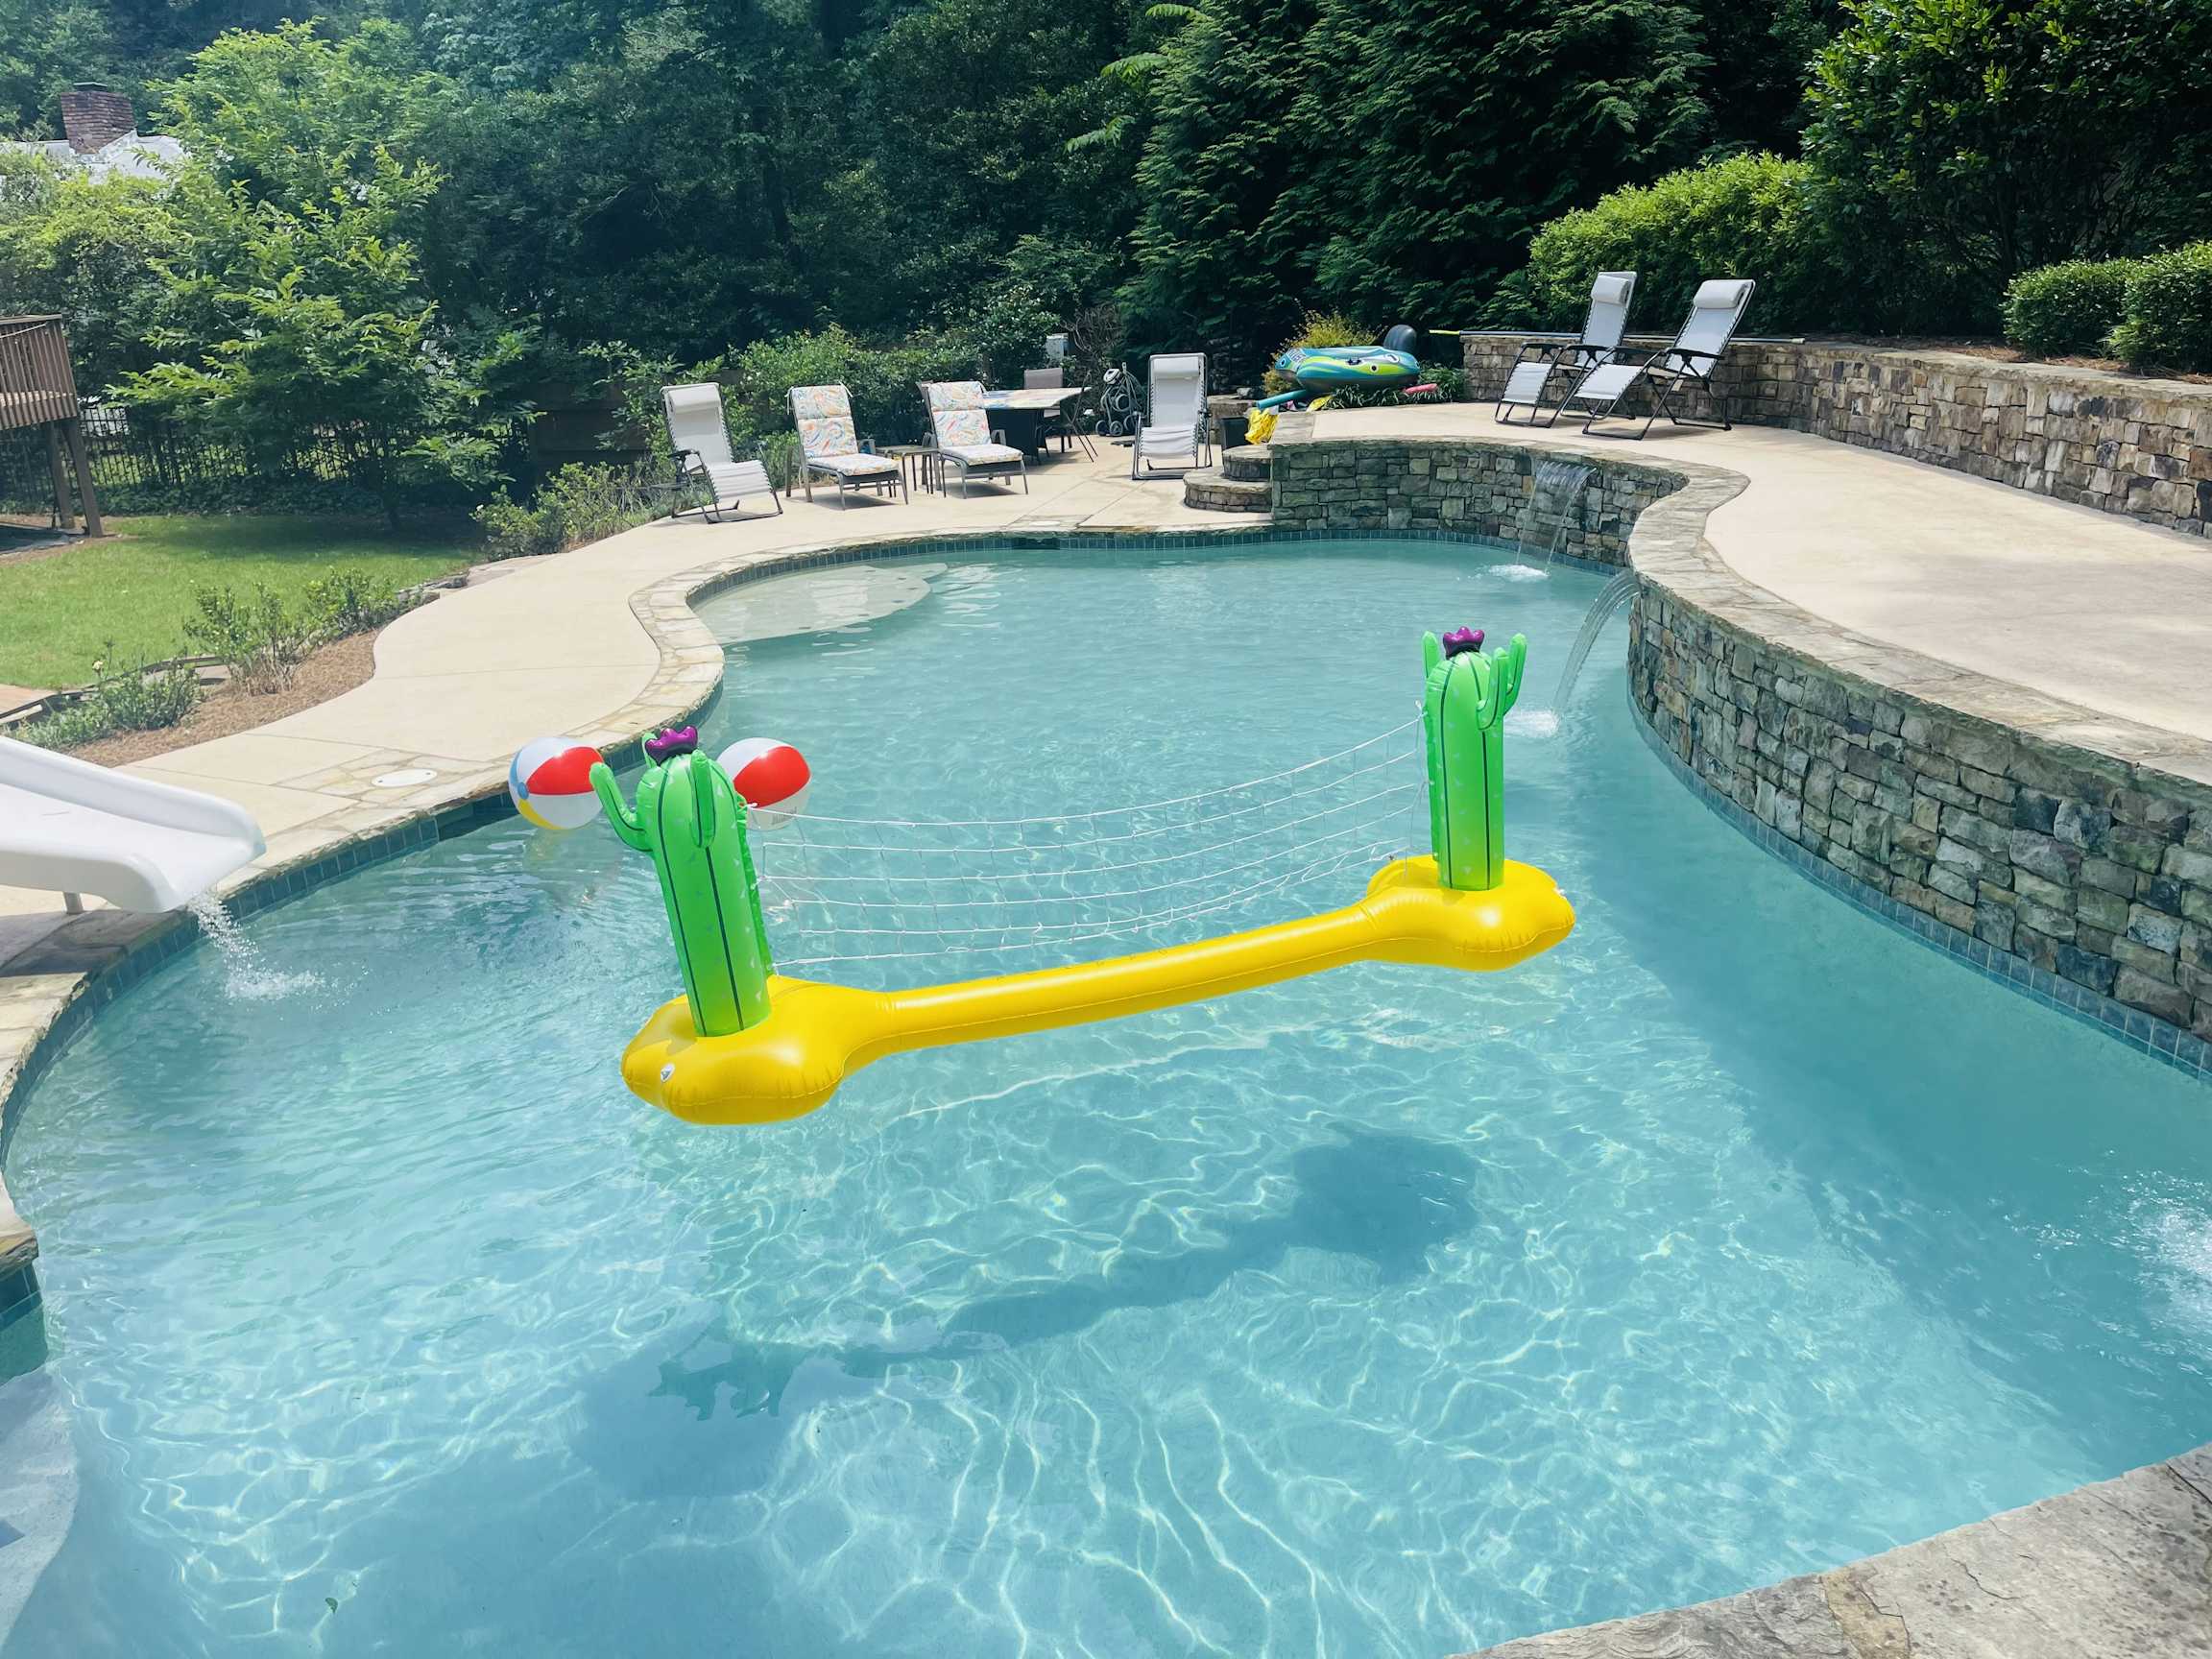 $240,000 investment in popular pool and waterslide